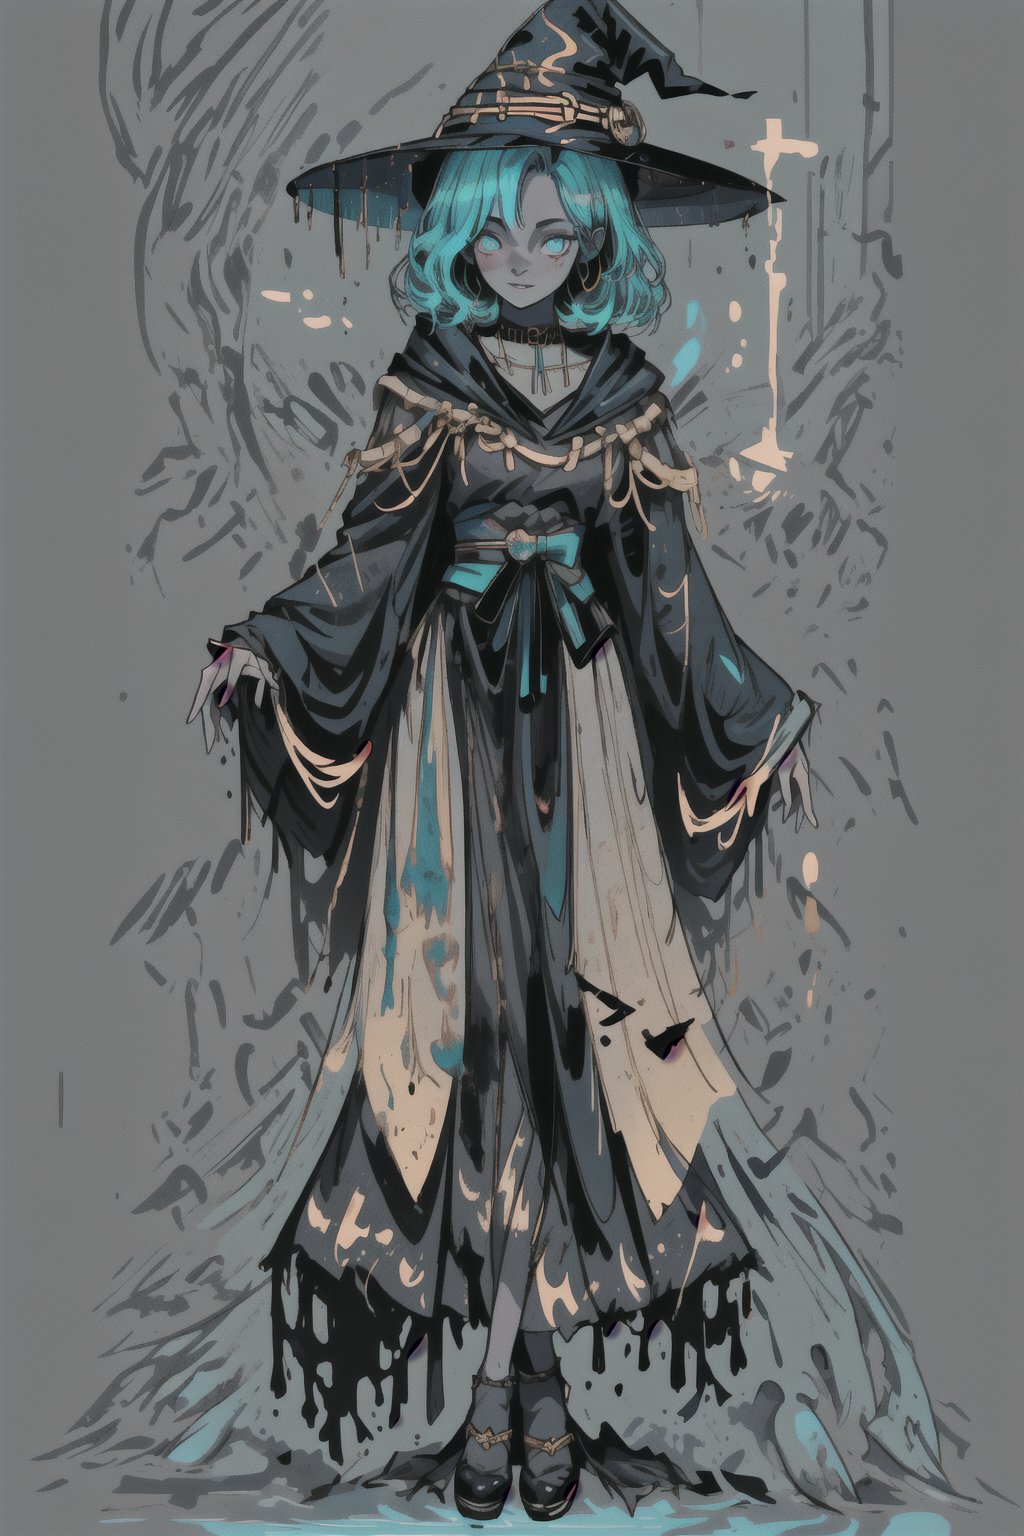 A beautiful witch with dark blue hair, turquoise eyes, wearing a beautiful flowing black robe with gold highlights